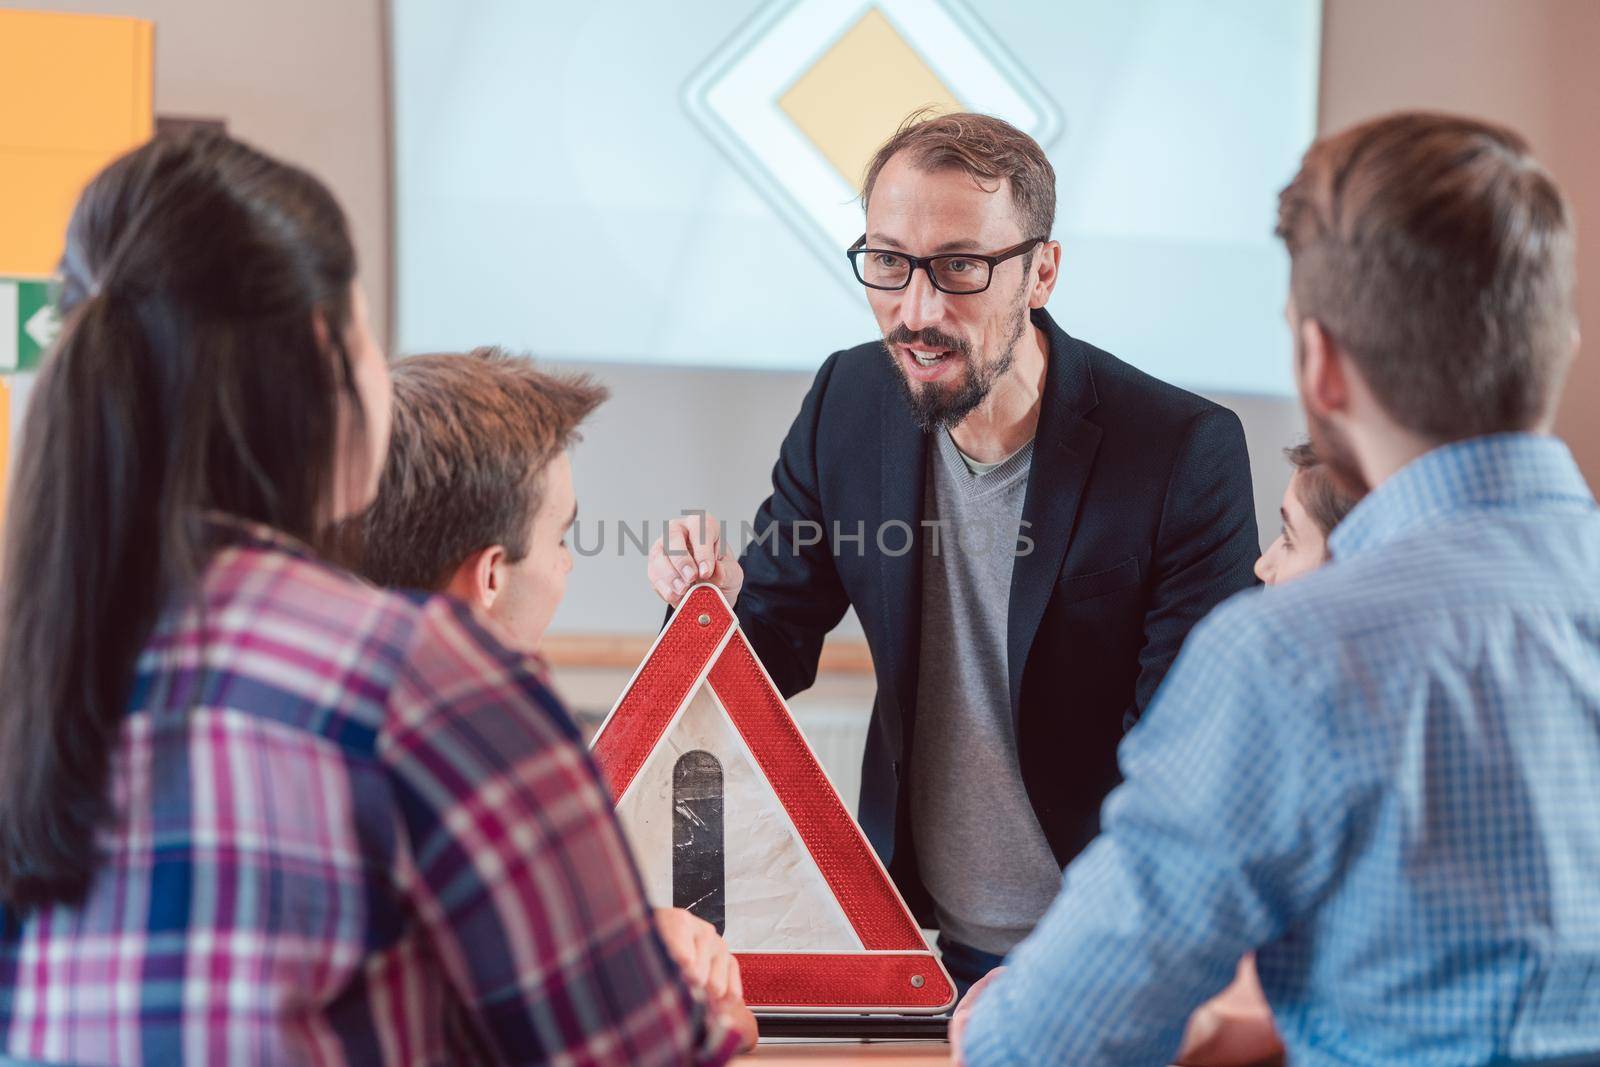 Extremely competent driving instructor holding a warning triangle in class with his students